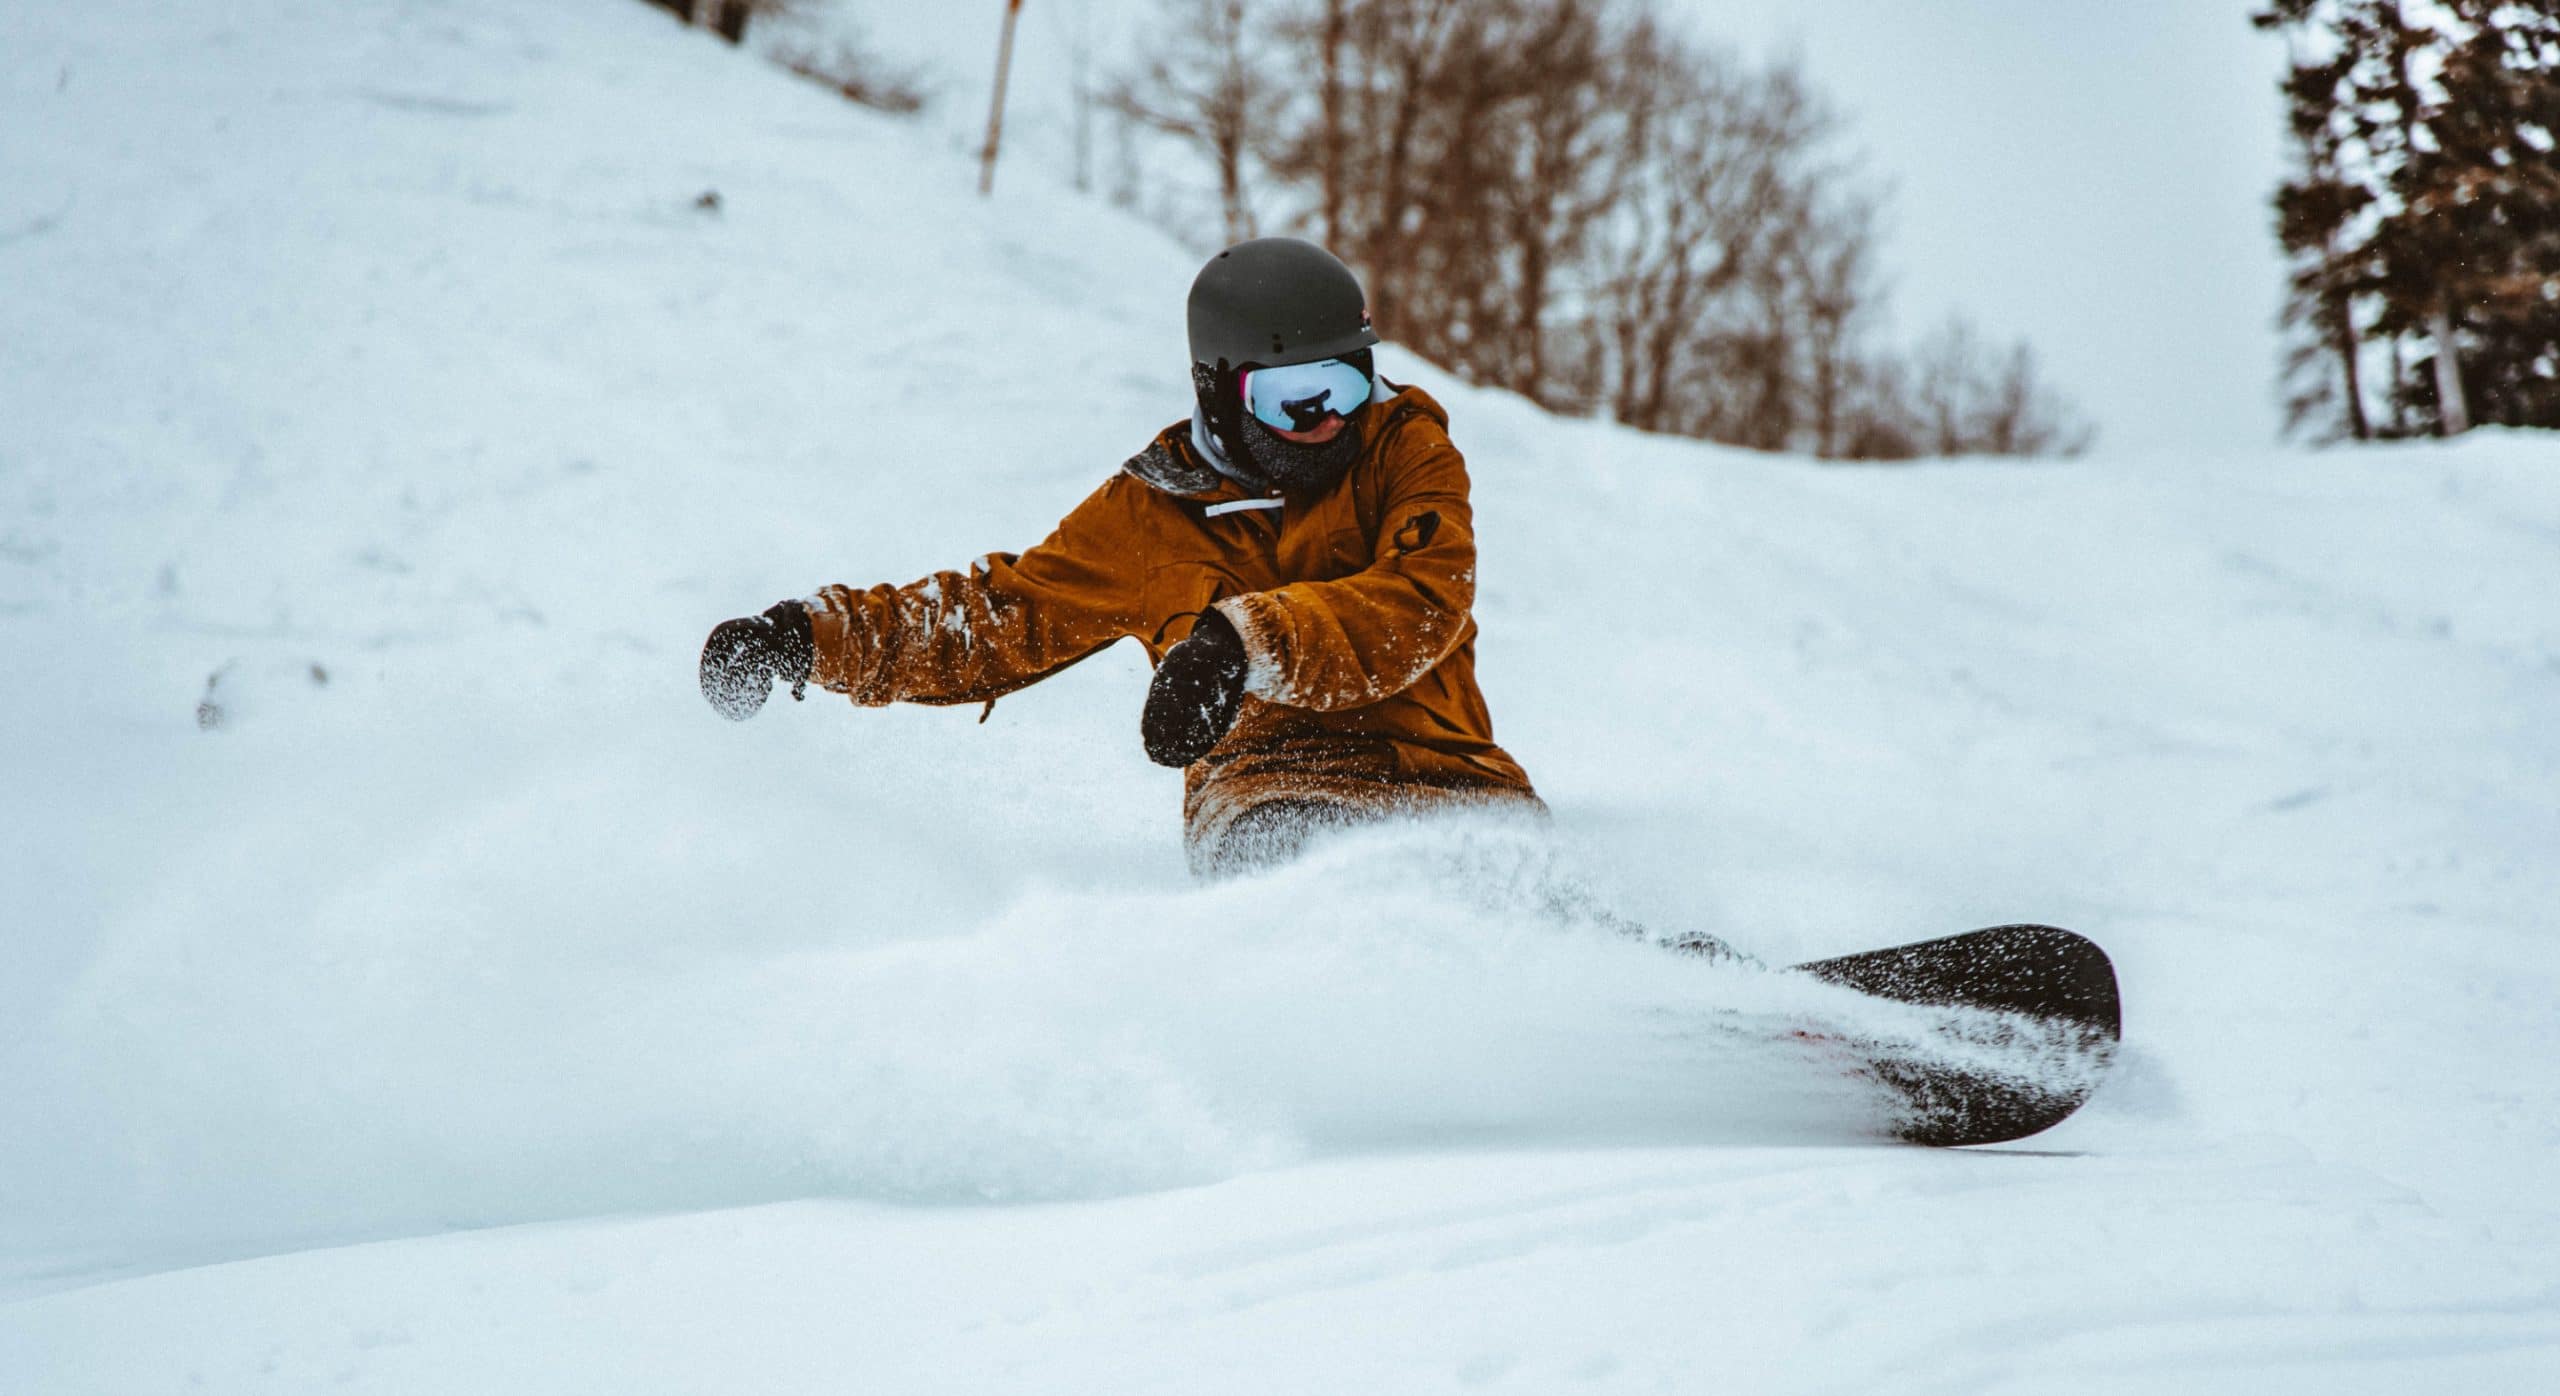 How to Ride Powder on a Snowboard